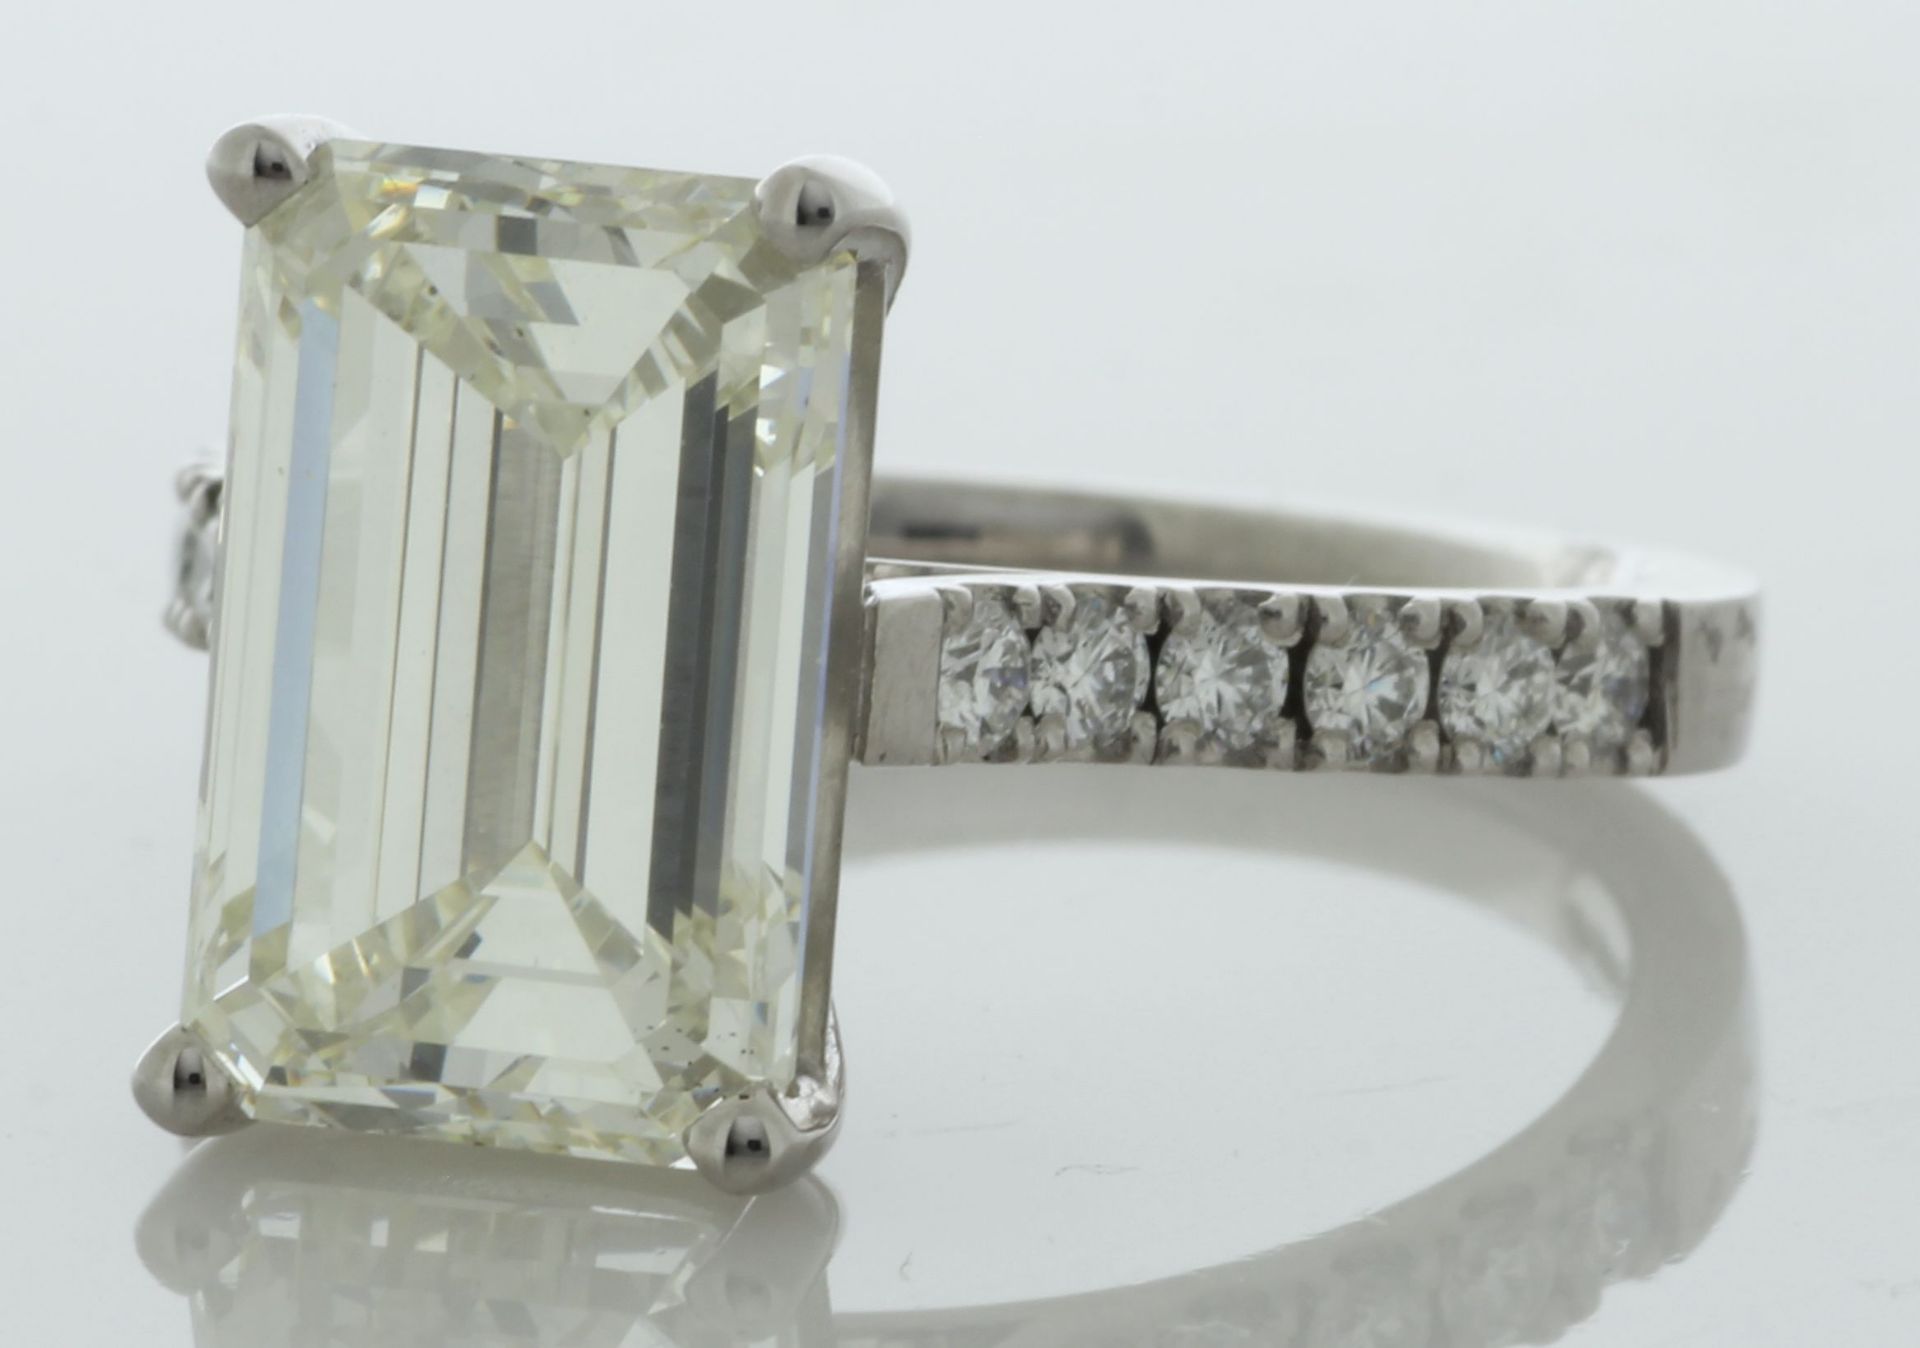 18ct White Gold Single Stone Emerald Cut Diamond Ring (D5.00) 5.35 Carats - Valued By GIE £437,115. - Image 2 of 3